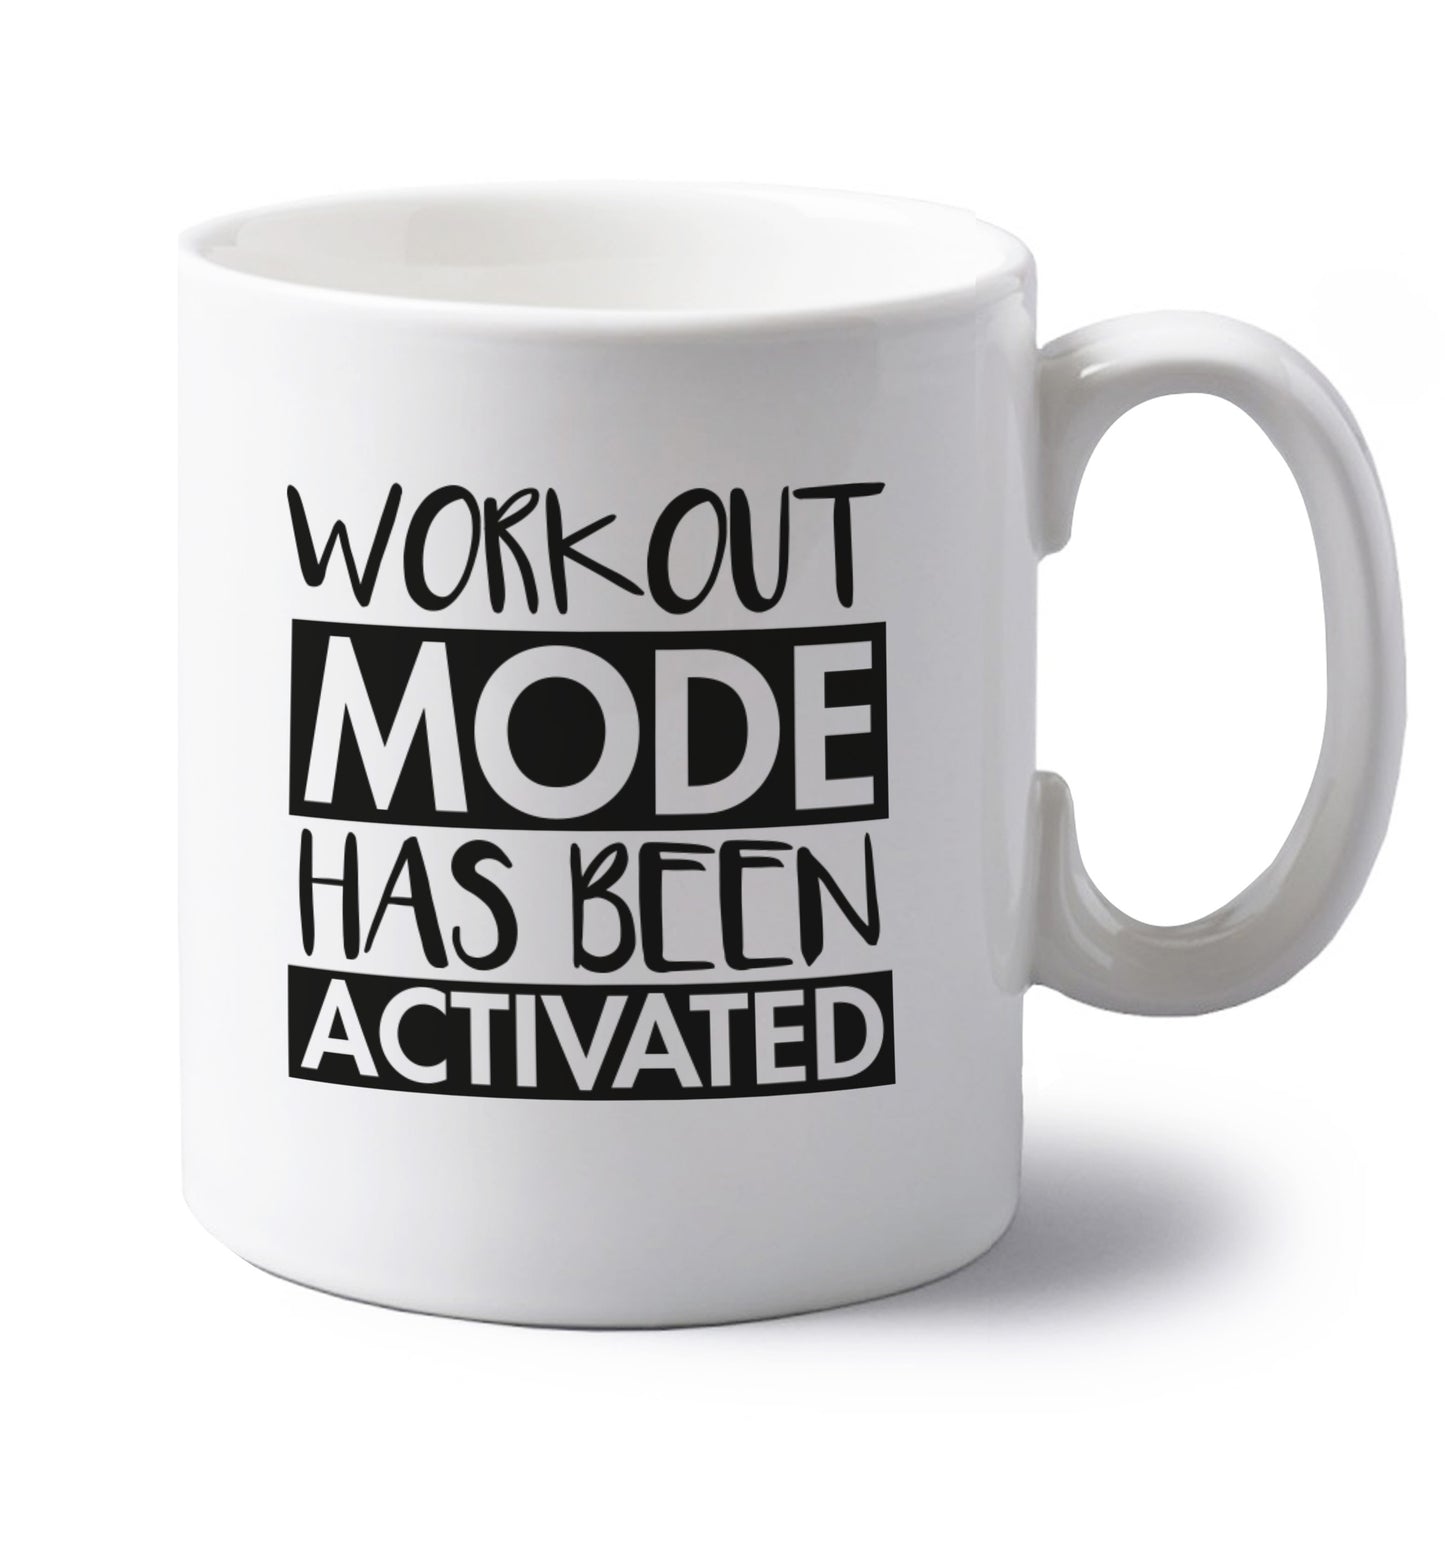 Workout mode has been activated left handed white ceramic mug 